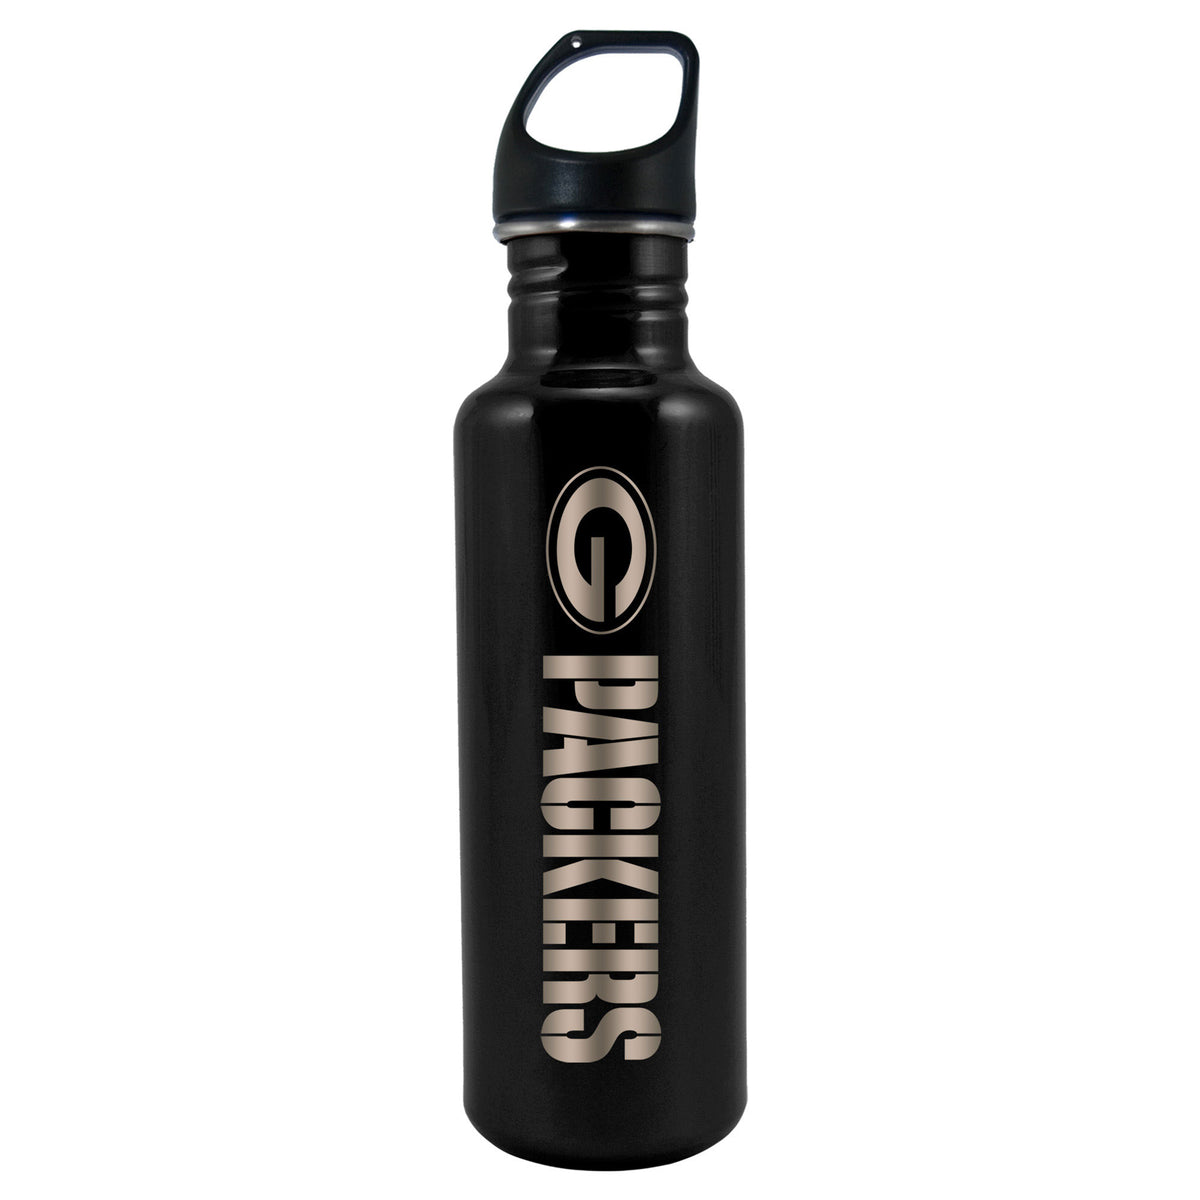 Green Bay Packers Stainless Steel Water Bottle (750ml/26oz.)